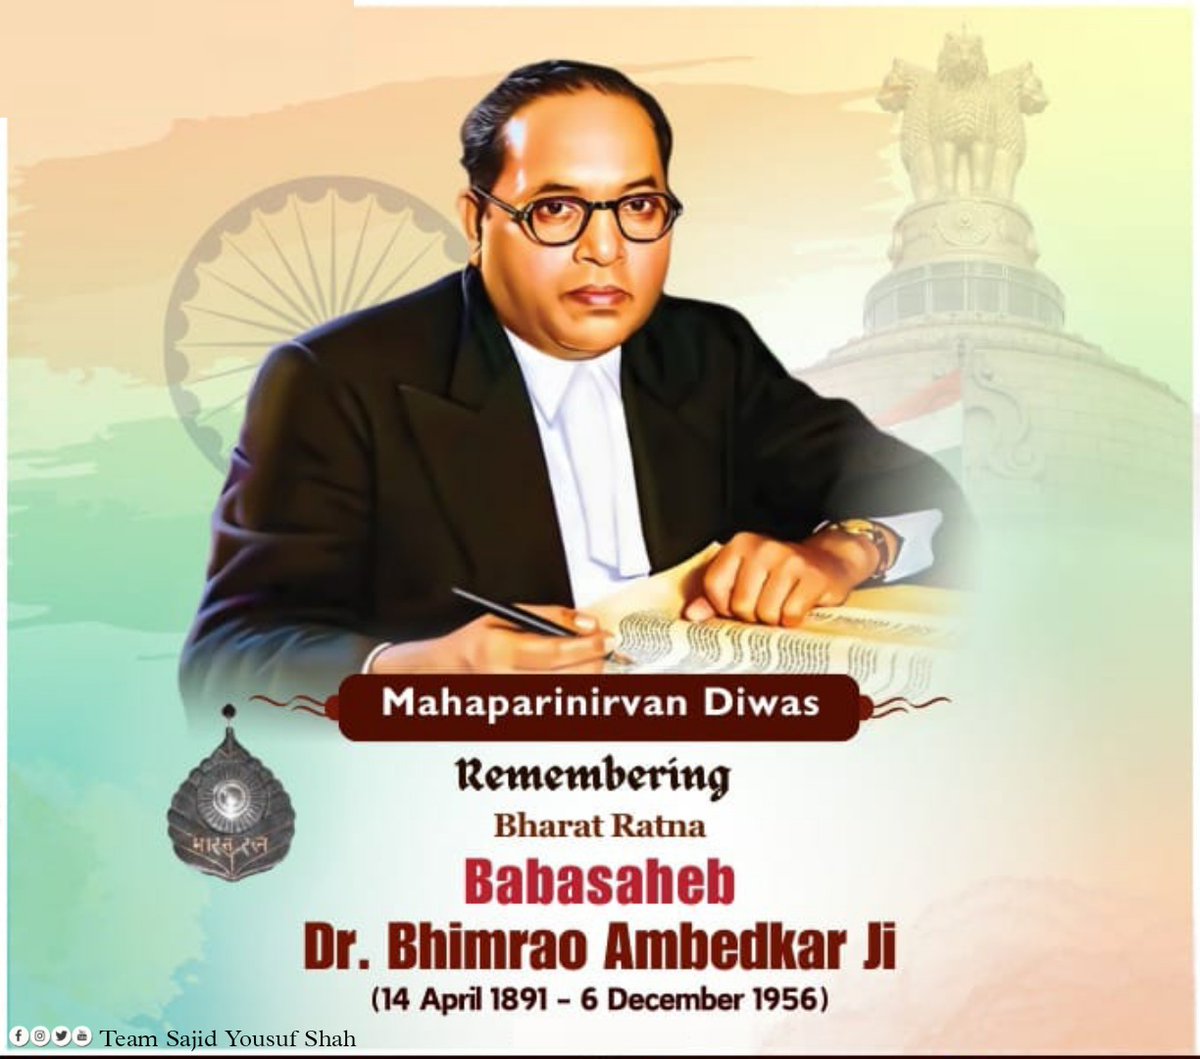 Honoring  Dr. BR  Ambedkar on Mahaparinirvan Diwas. His visionary leadership in crafting our constitution and tireless dedication to uplifting the marginalized echo through time. Let's unite in upholding his ideals, striving for a society marked by justice, fairness, and humanity